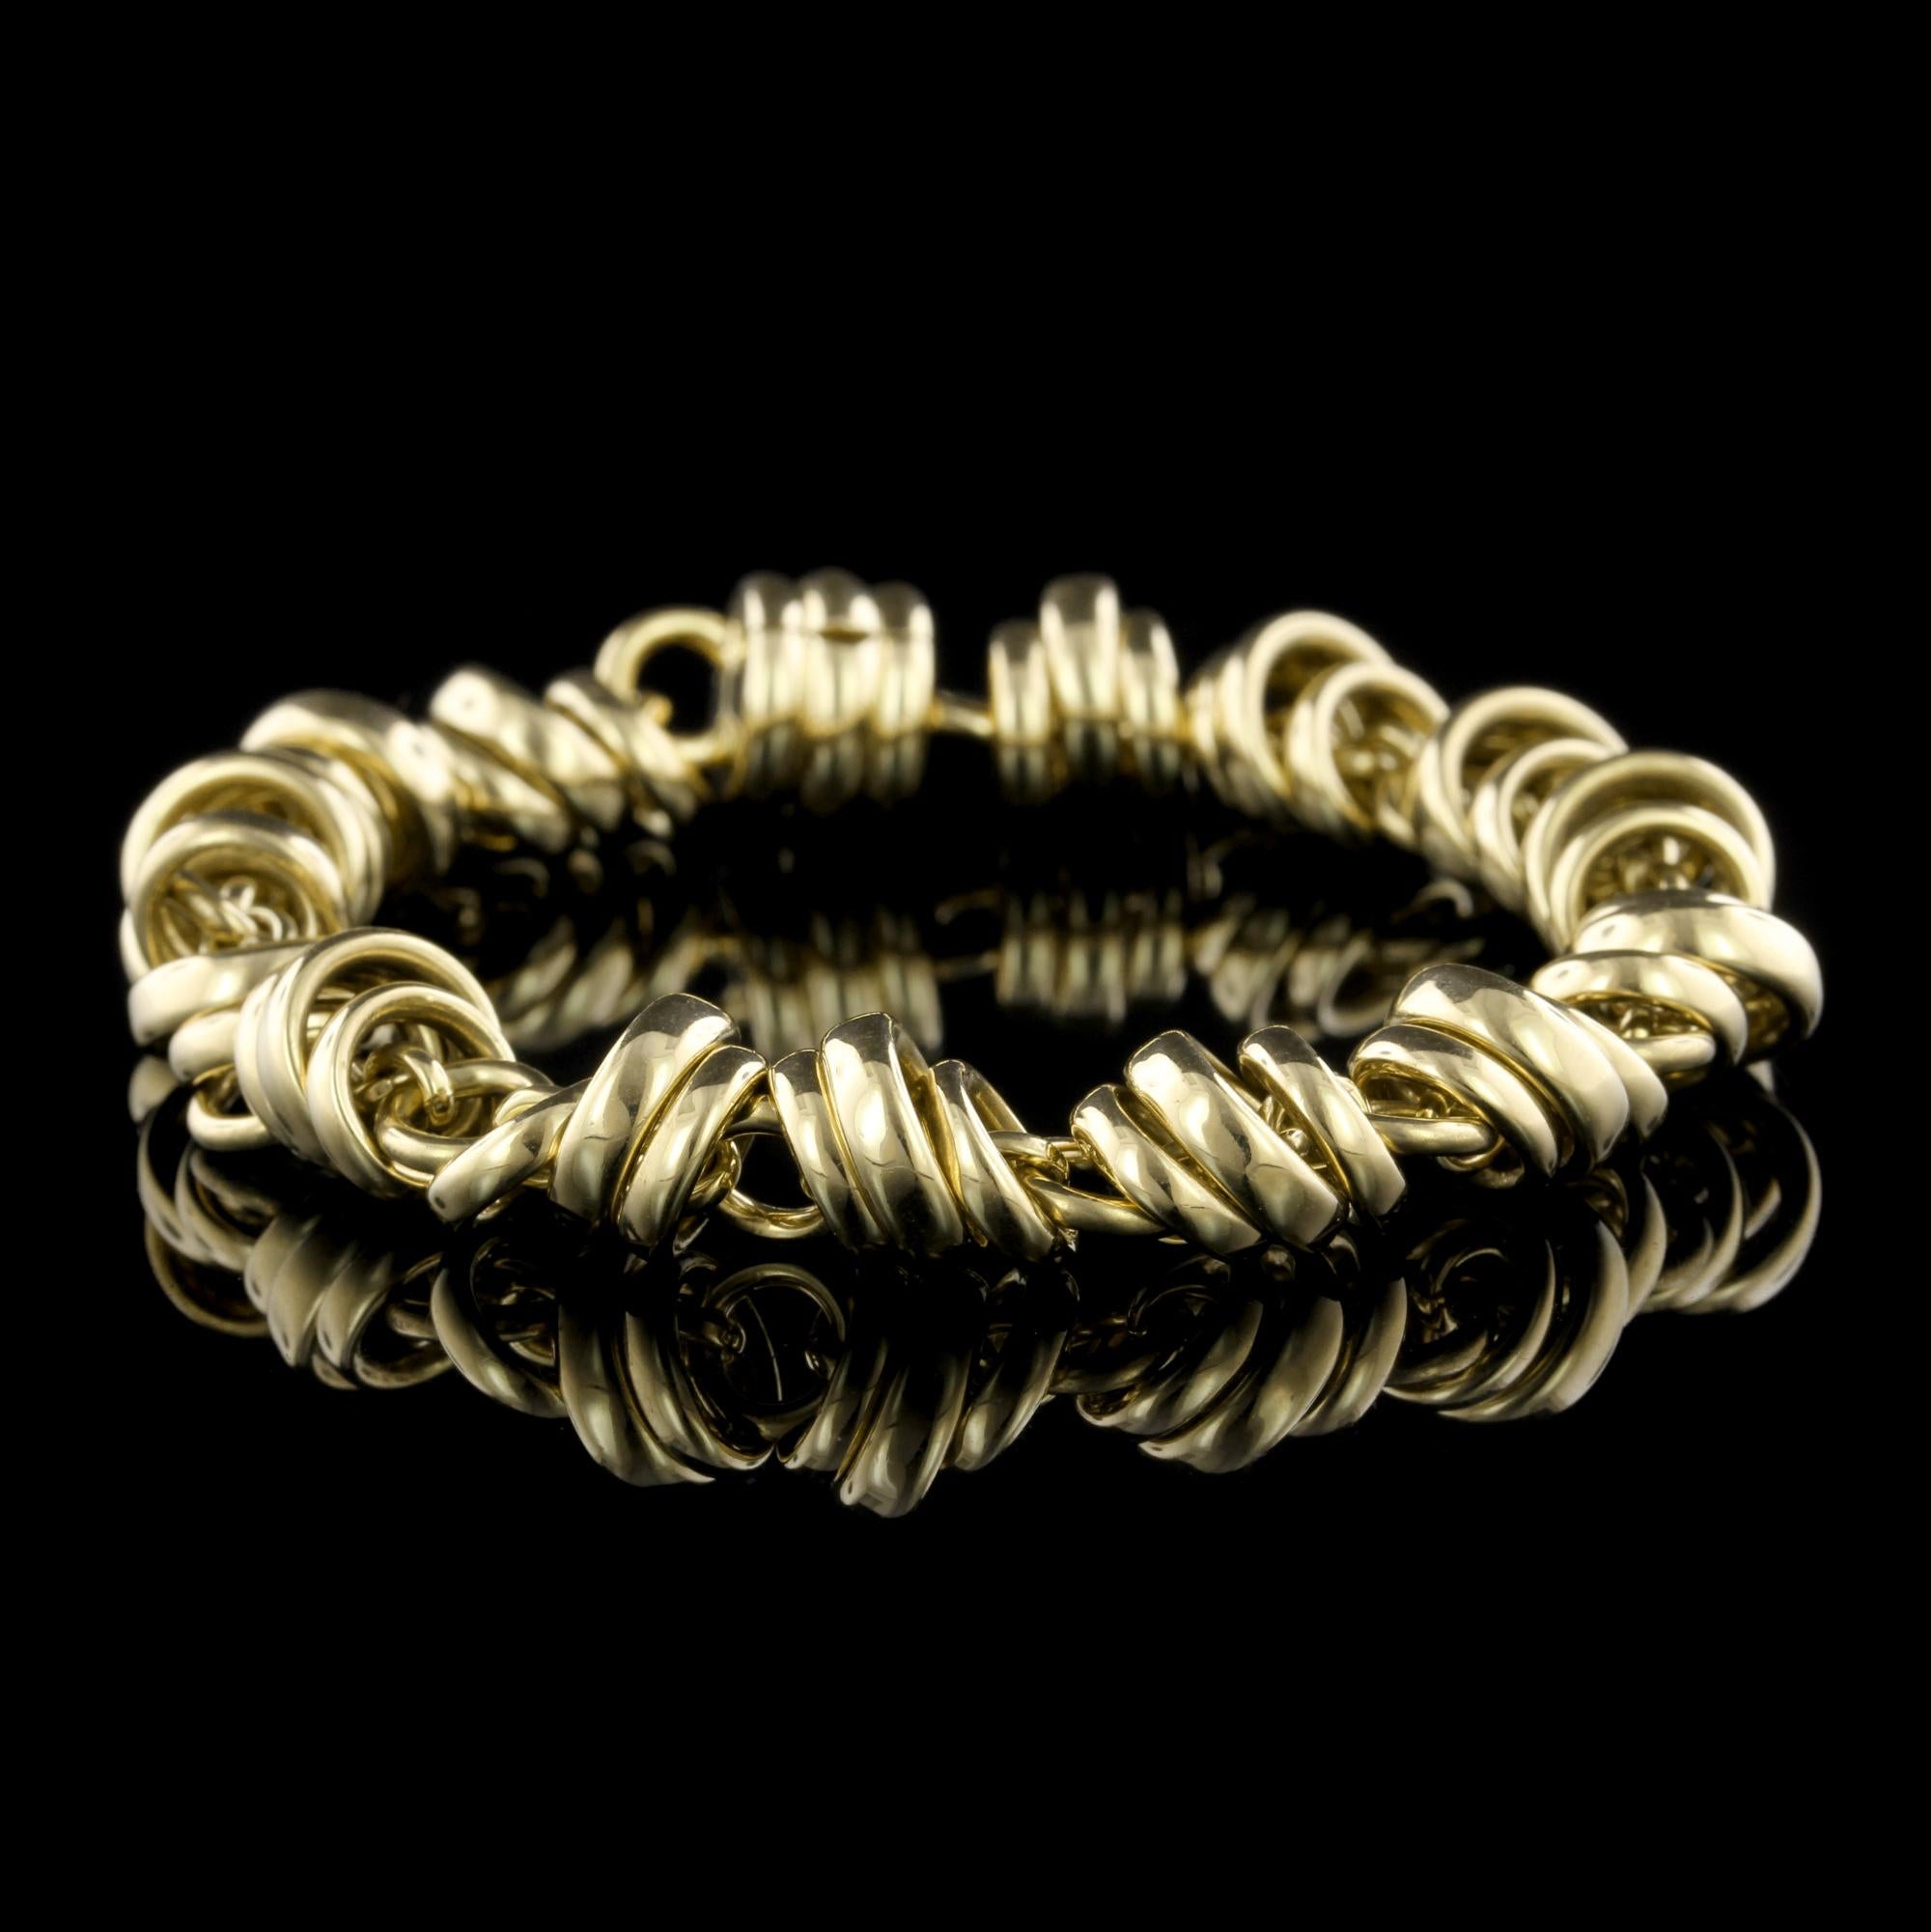 Pomellato 18K Yellow Gold Bracelet, Italy. The bracelet is designed with moving circular links, length 7 3/8